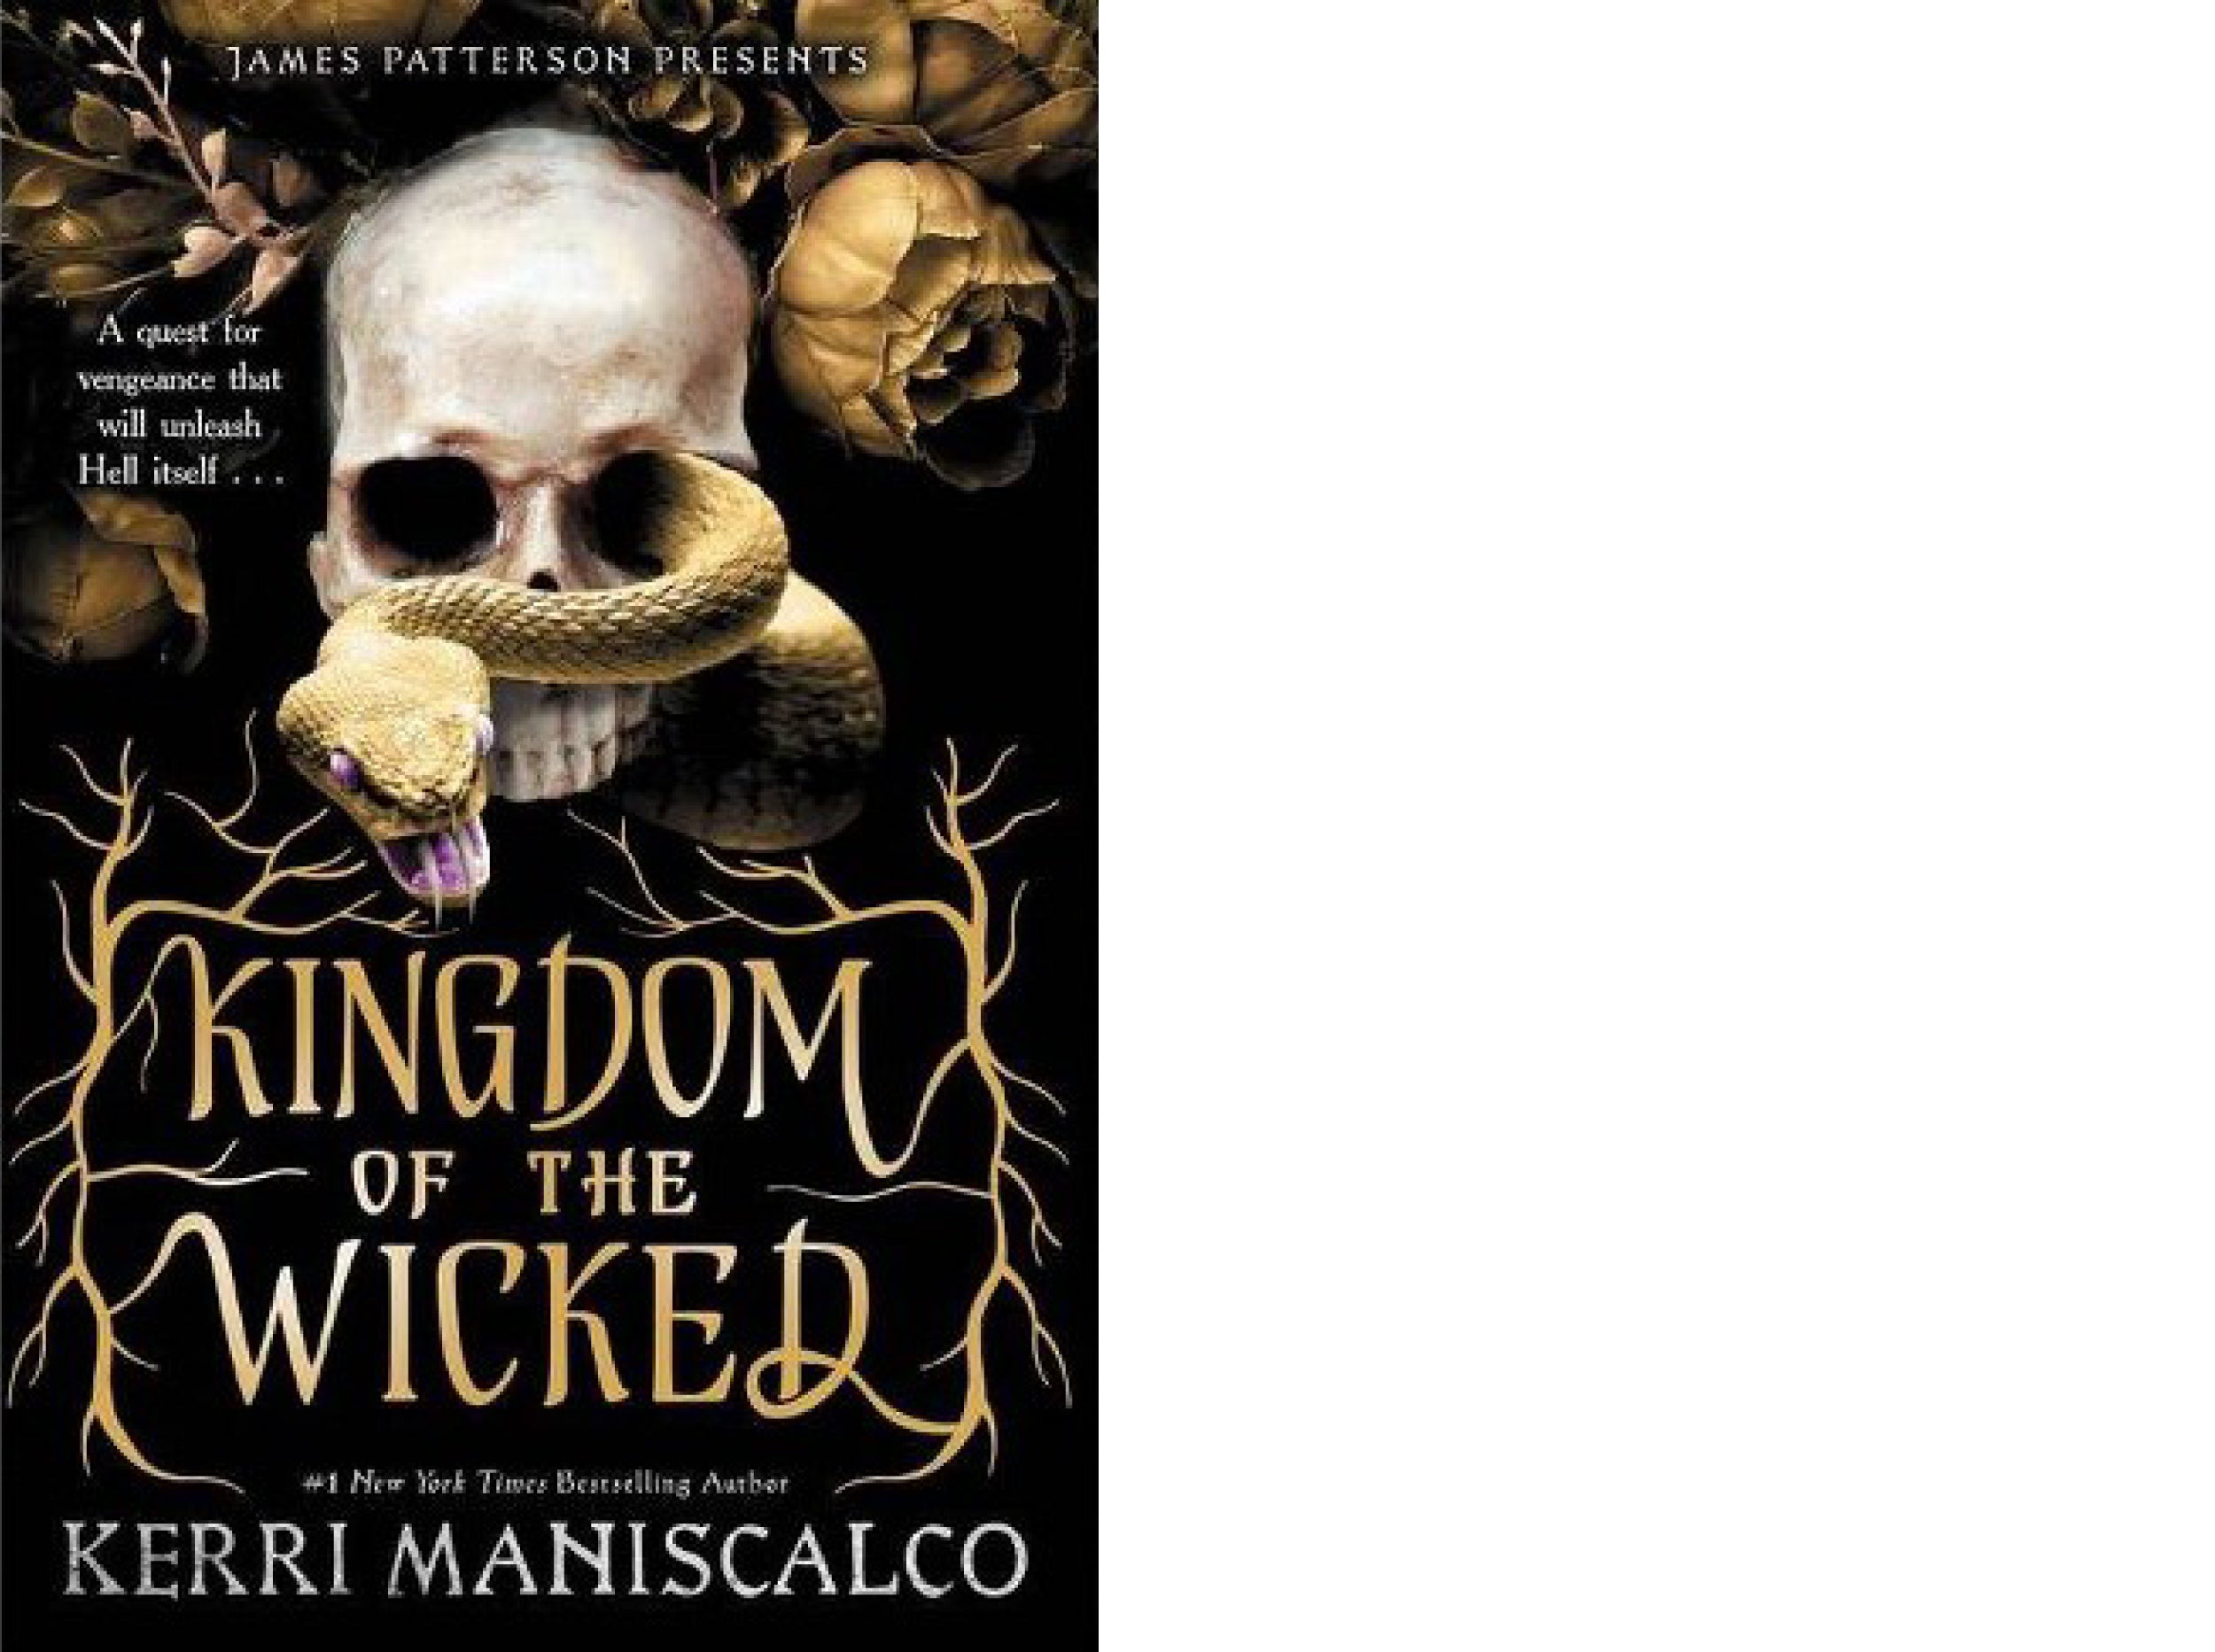 Book cover: "Kingdom of the Wicked."